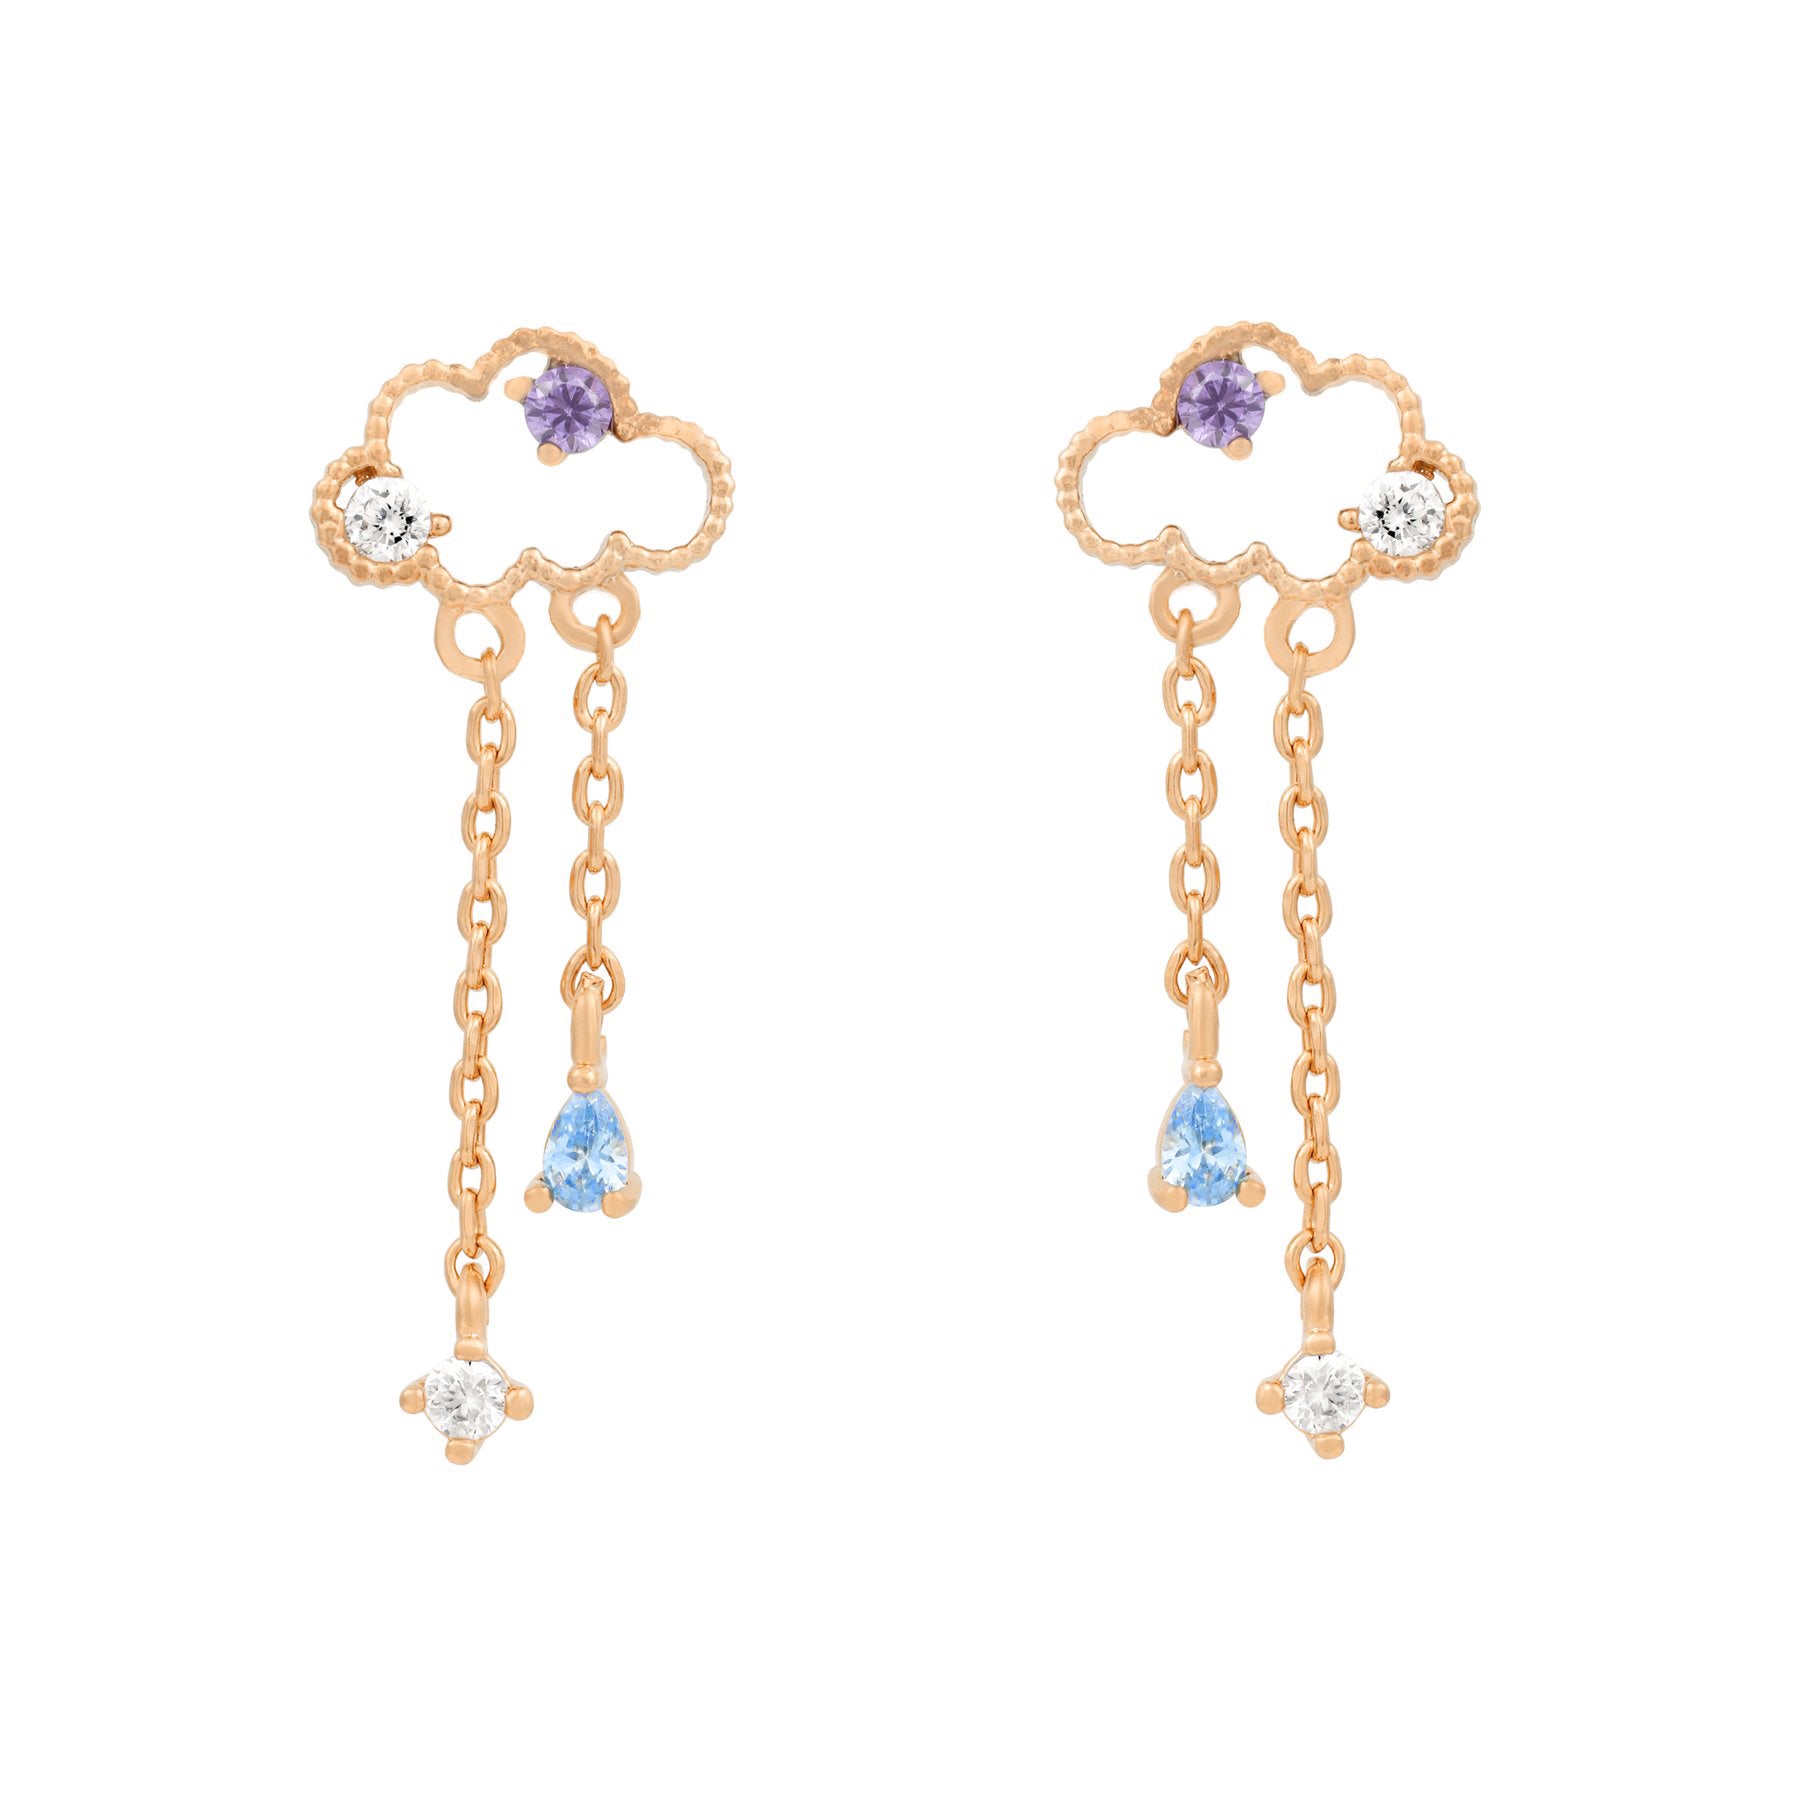 Reigning Clouds Dangle Earrings